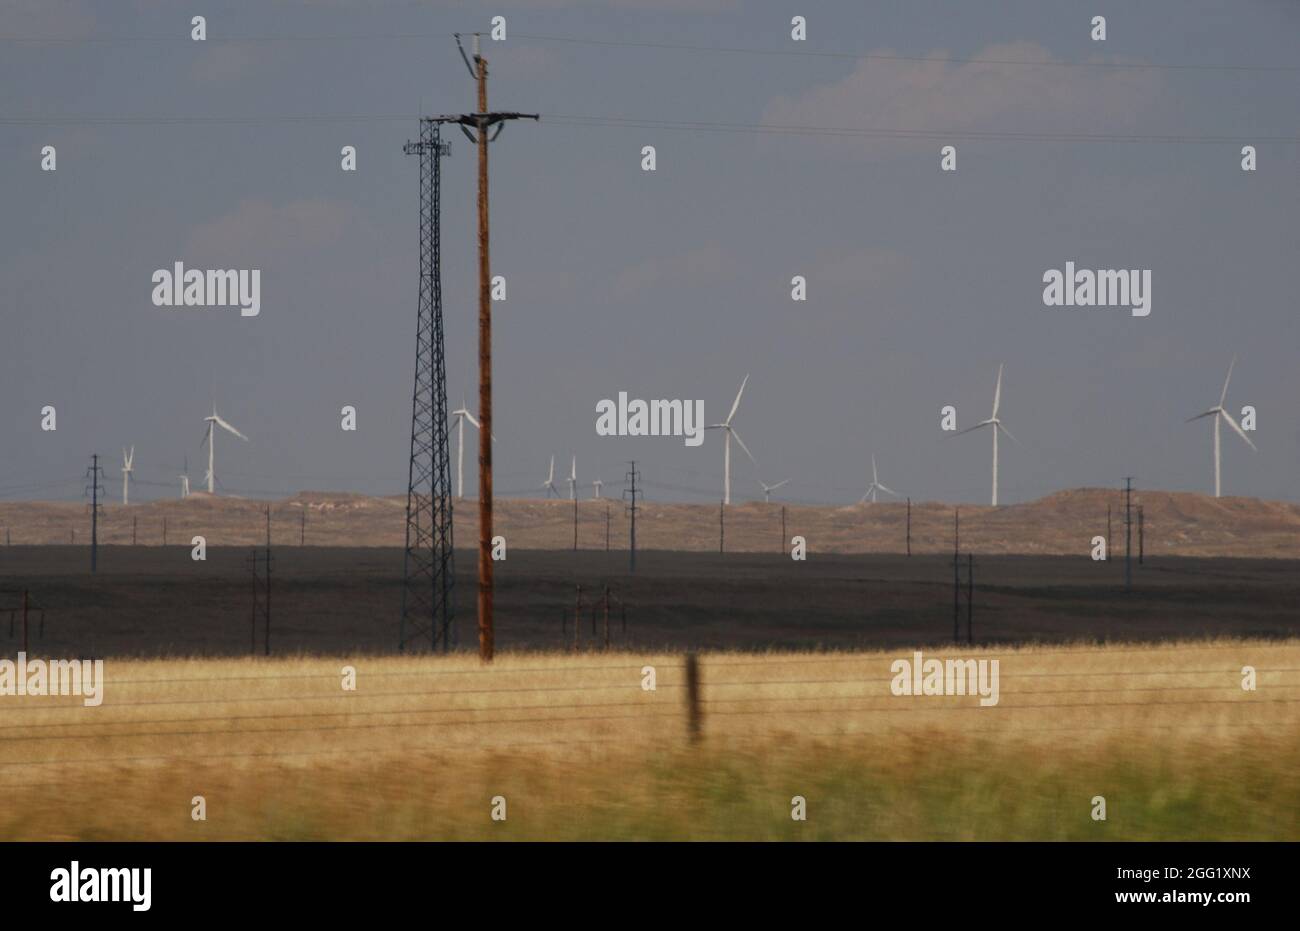 Clean energy generation of a wind farm in Wyoming finds a niche in the coal and oil state of Wyoming. Stock Photo